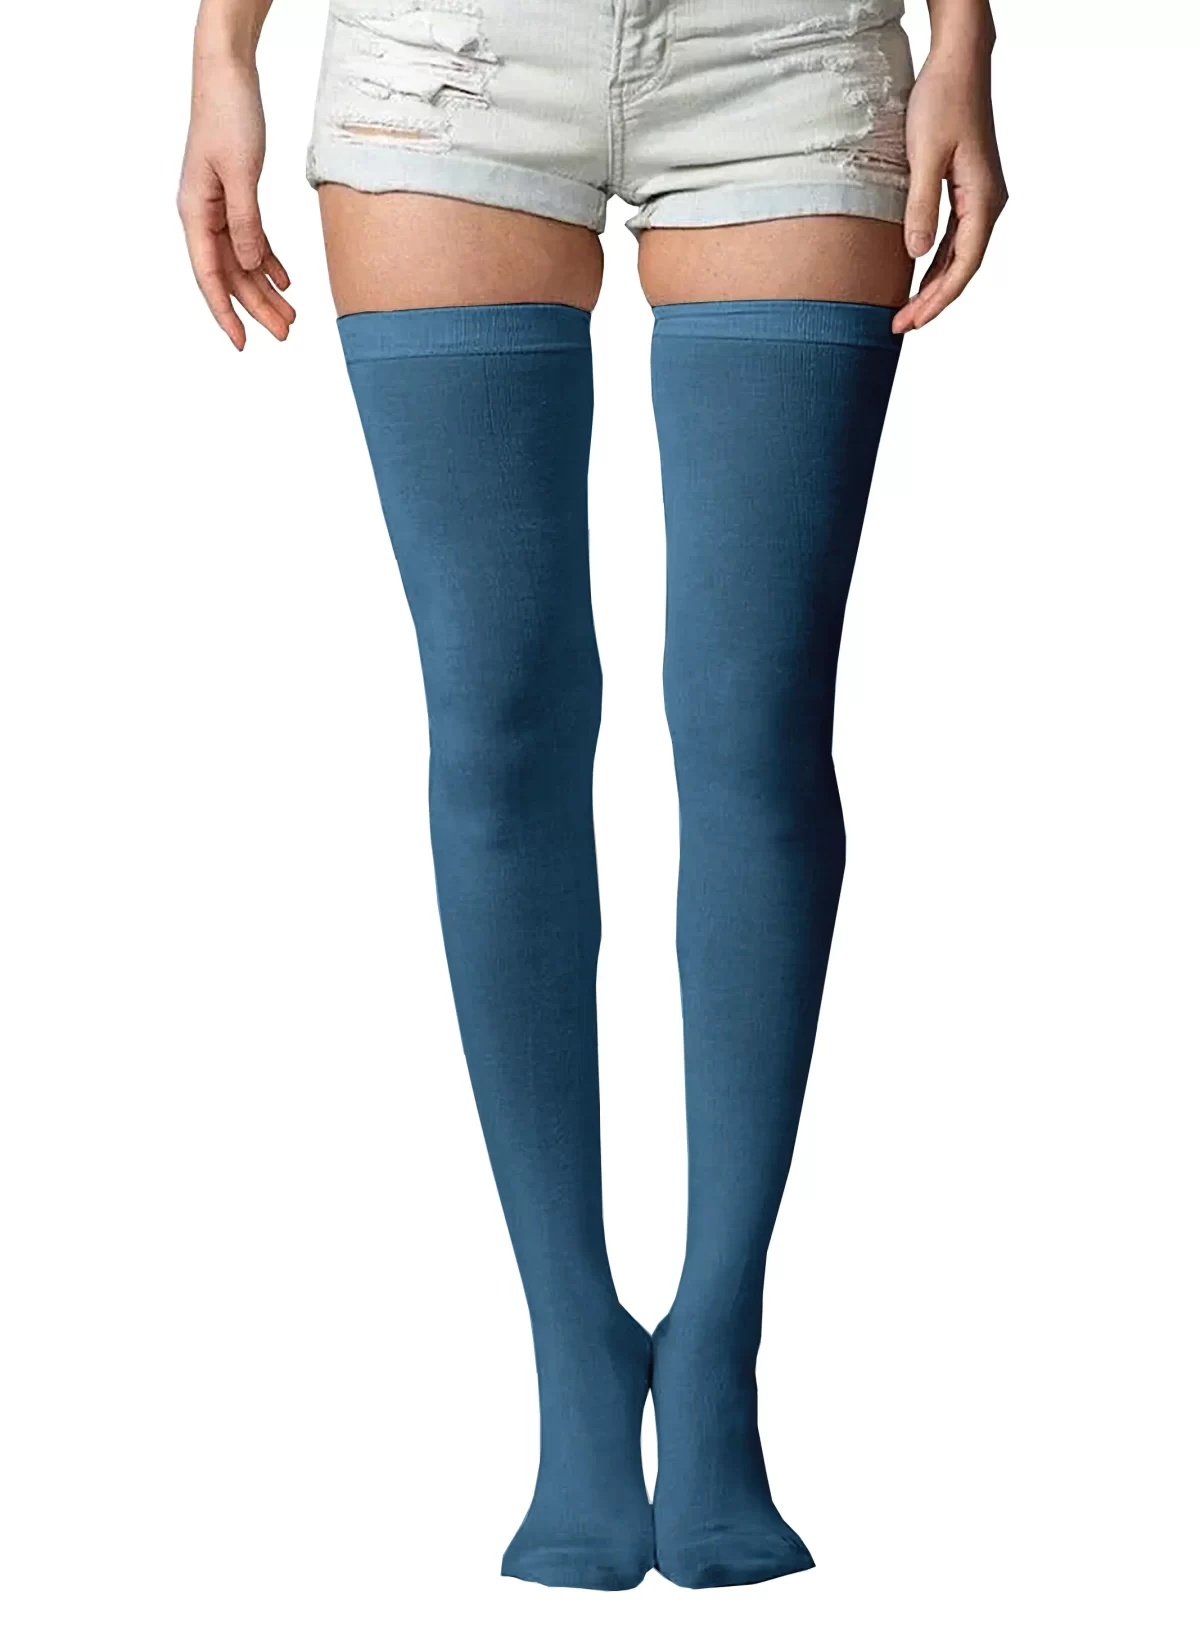 Steel Blue Girls and Women's Thigh High Stocking/Socks ( Free Size )4